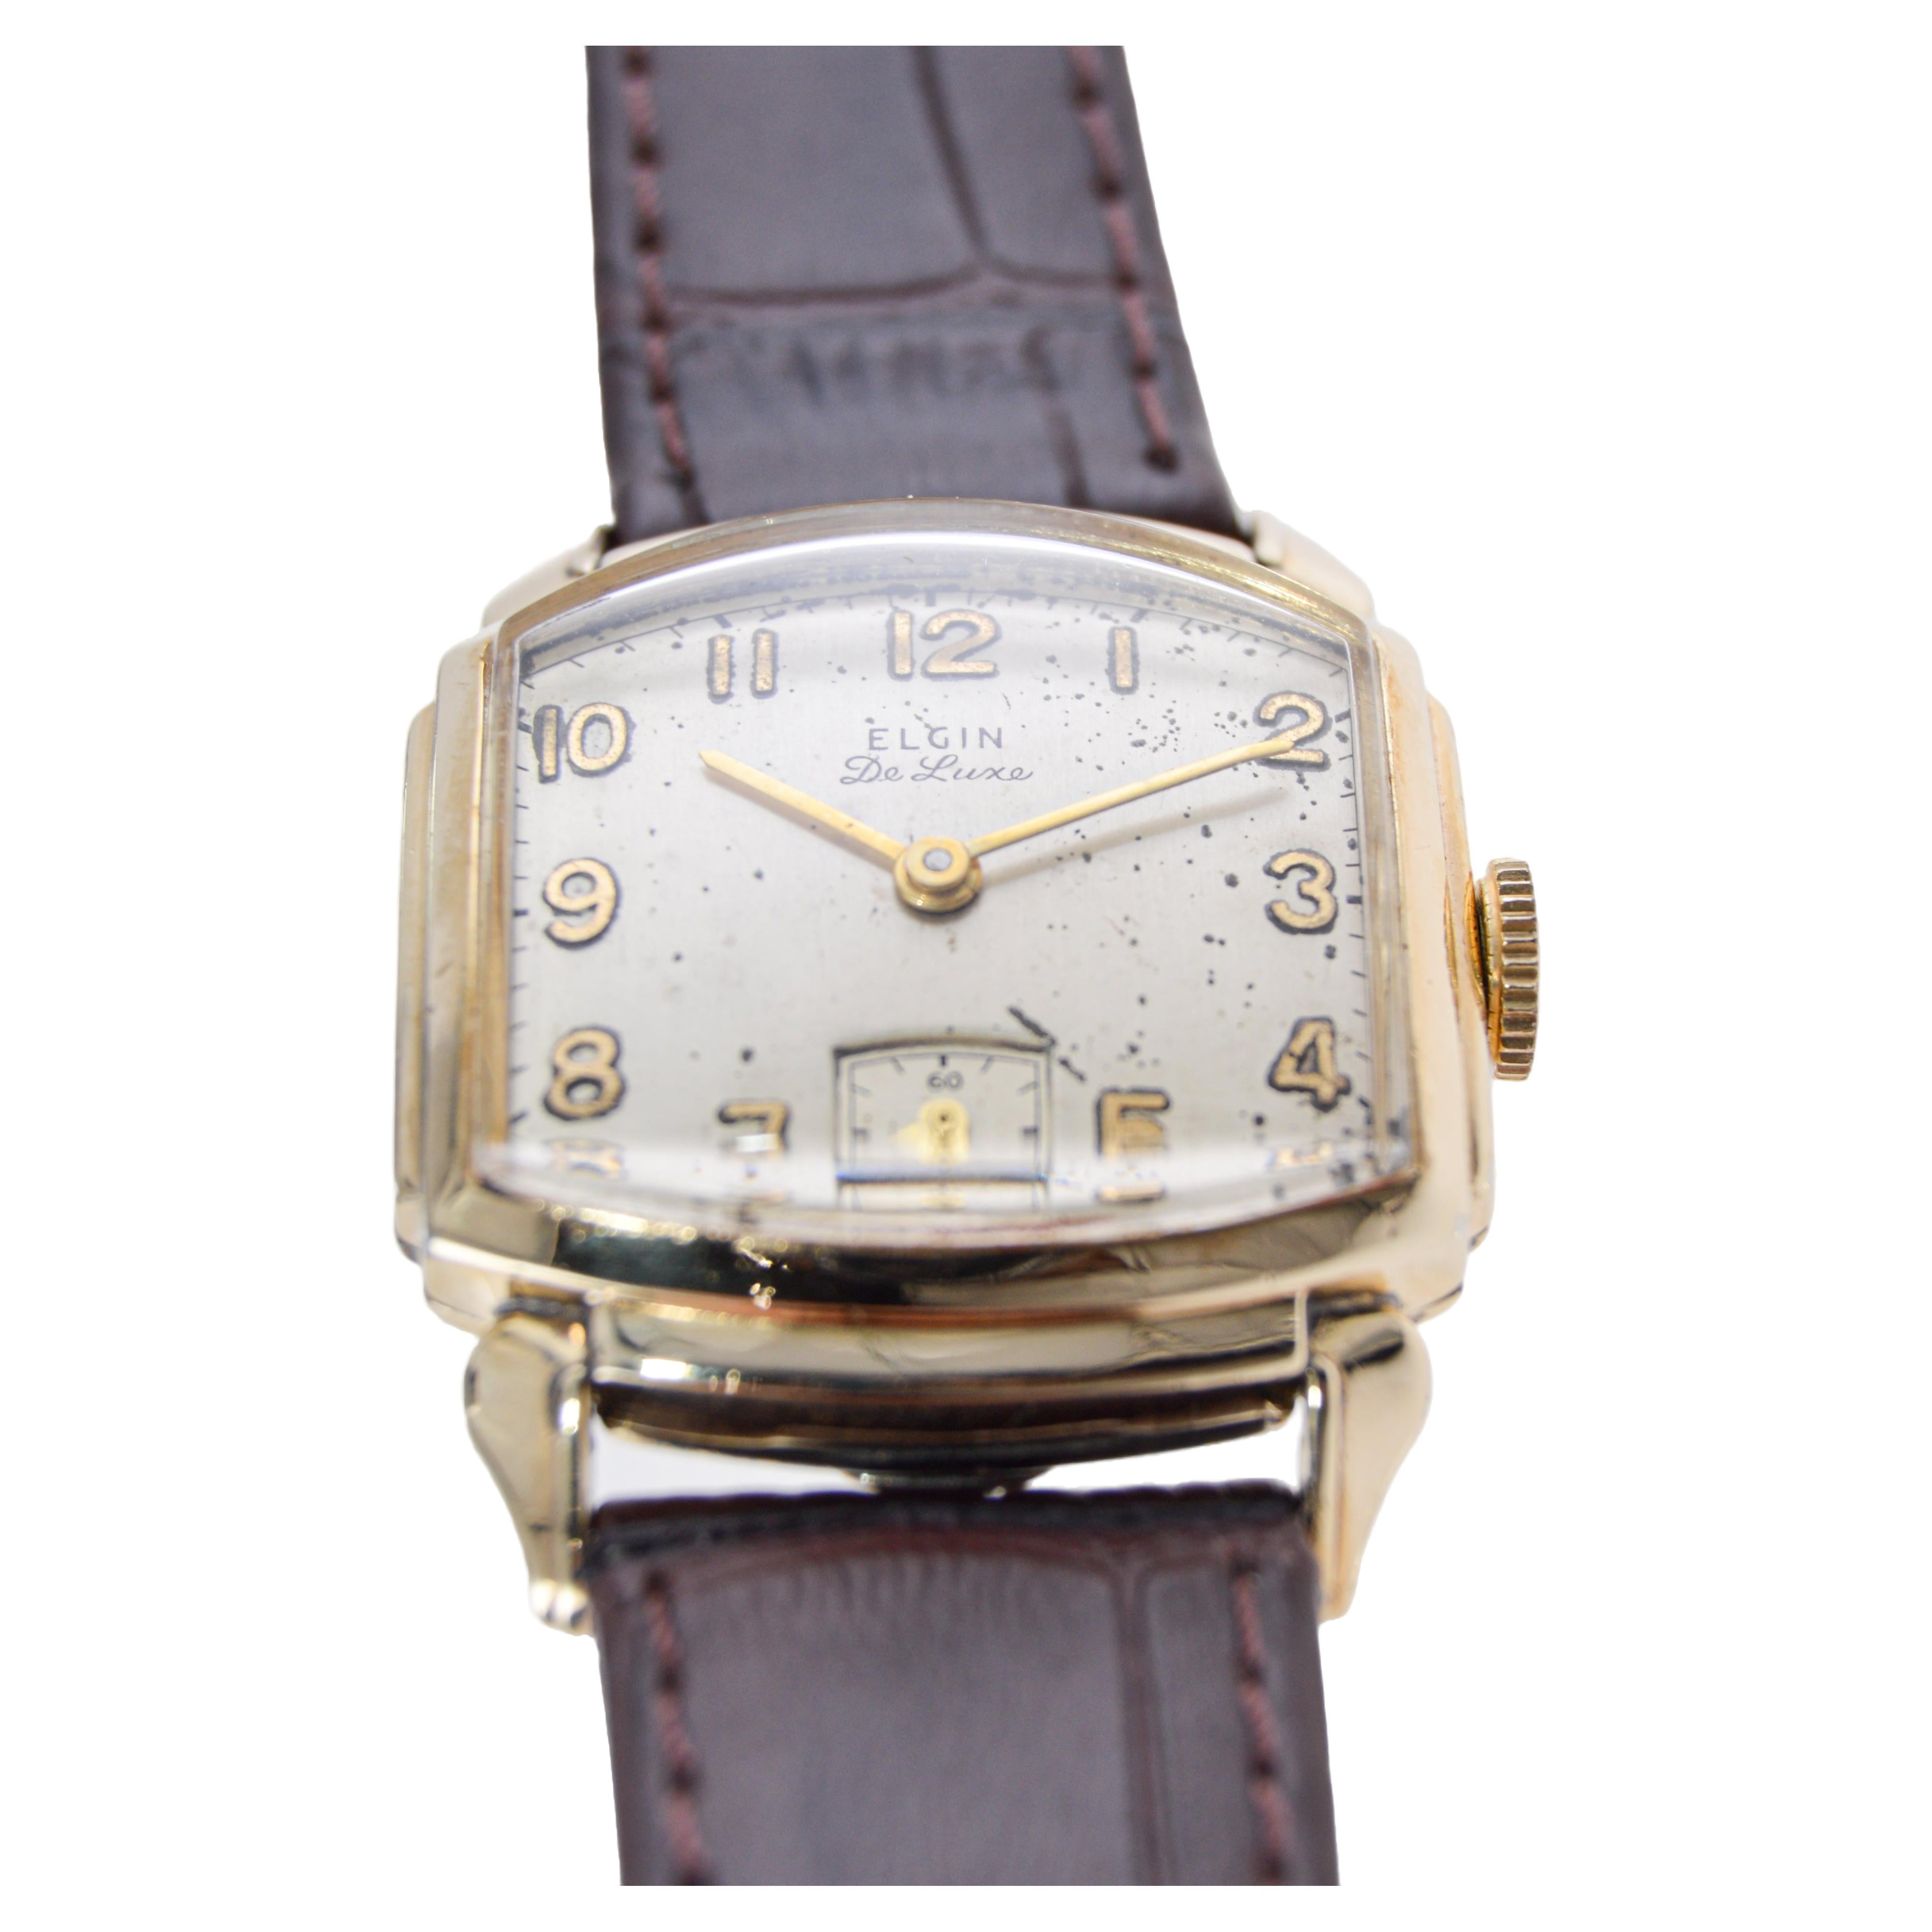 Elgin Yellow Gold Filled Art Deco Watch with Original Dial from the 1940's For Sale 1